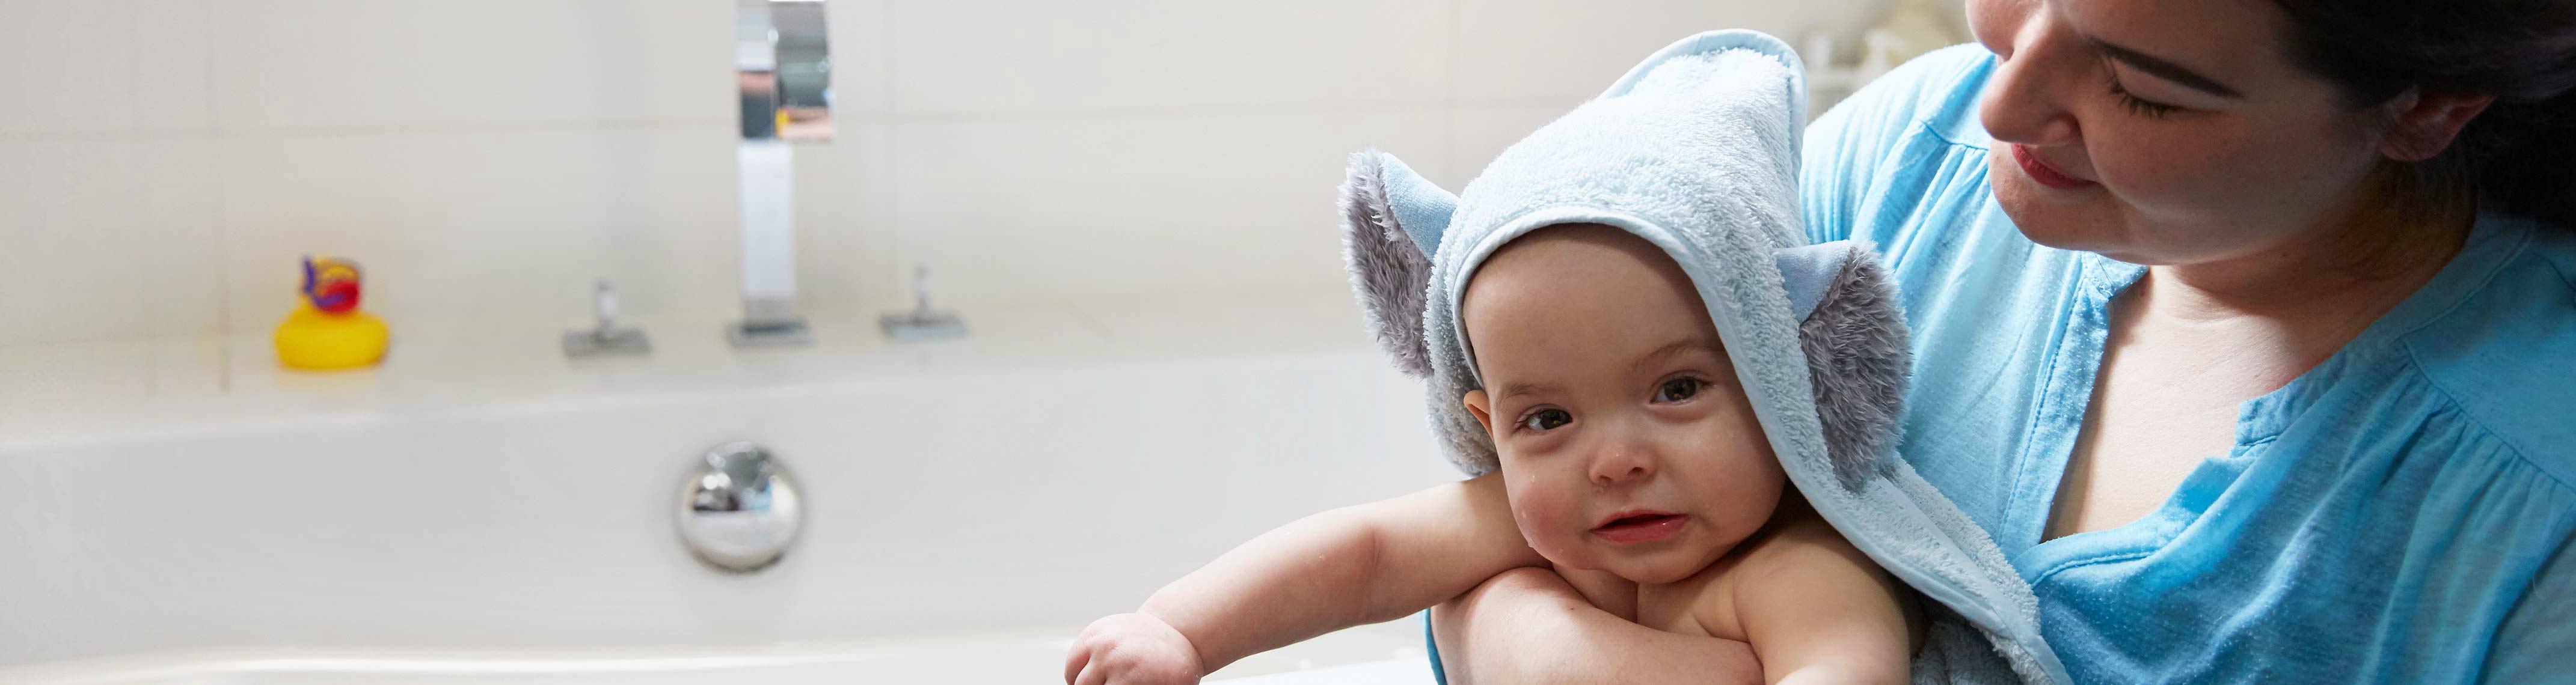 Baby Bath Time Guide | Johnson's®